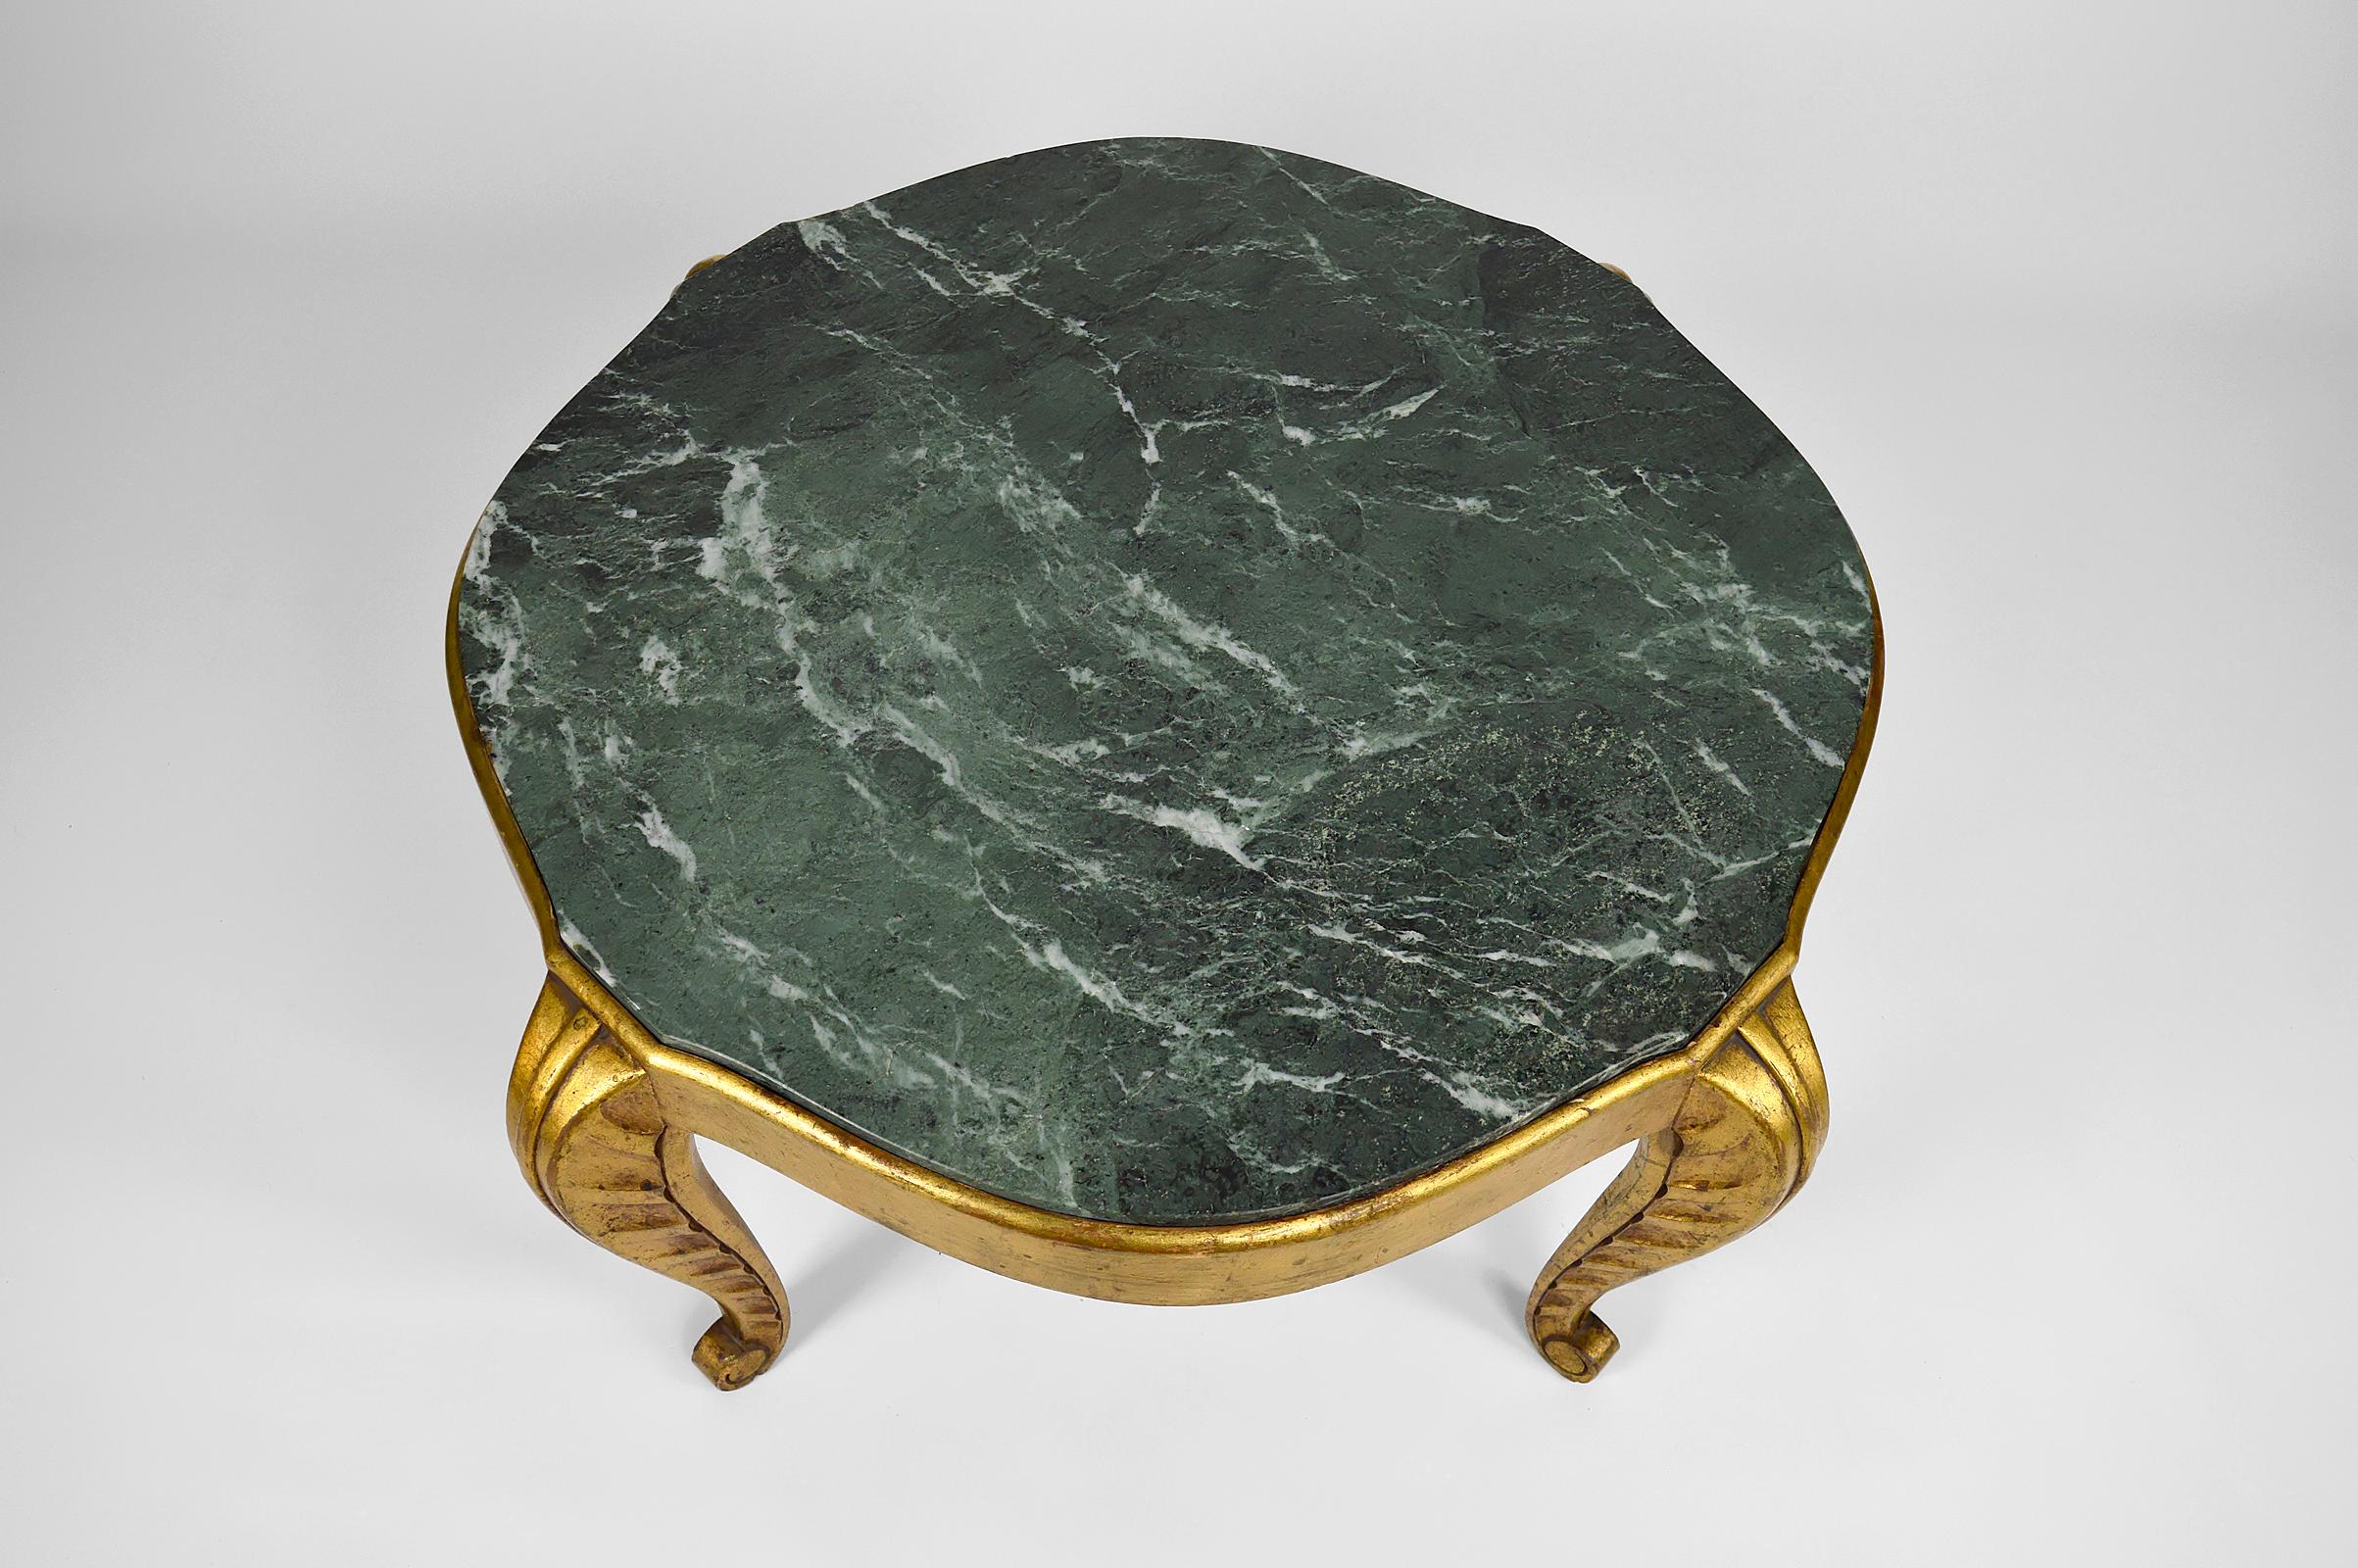 Gilded Side Table with Marble Top by Maison Jansen, Neoclassical Art Deco, 1940s For Sale 5